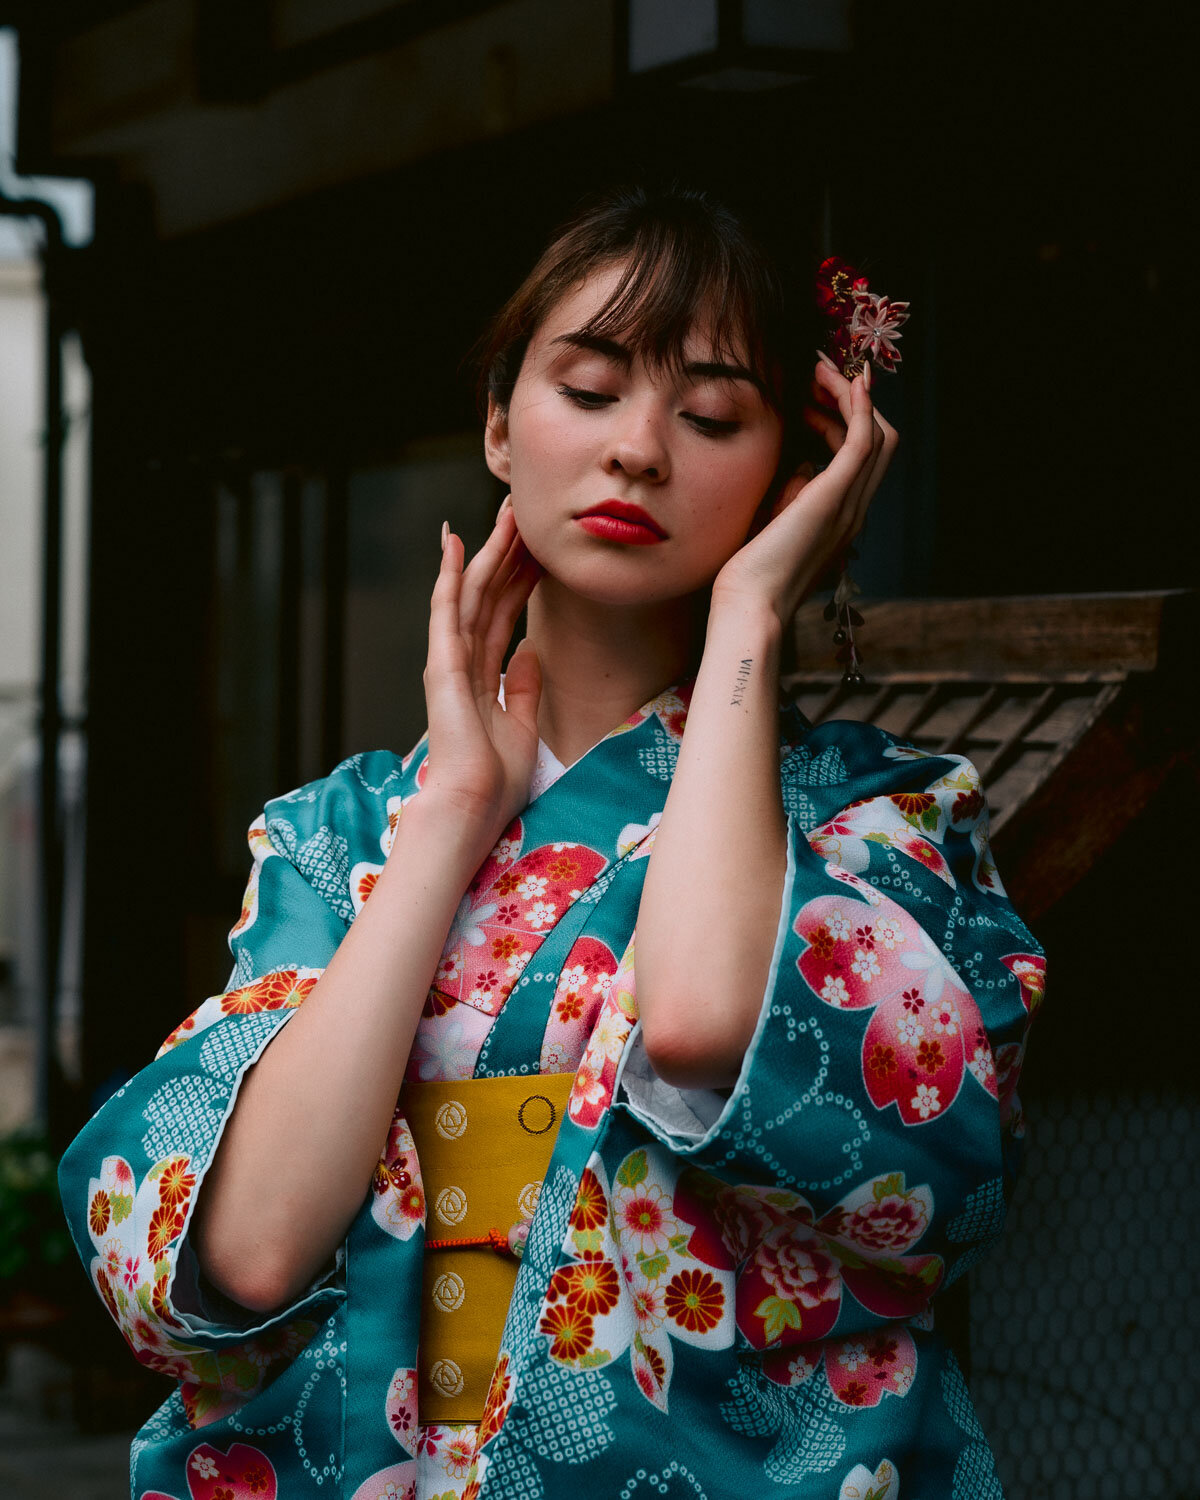 Editorial &amp; Fashion photographer in Tokyo, Japan